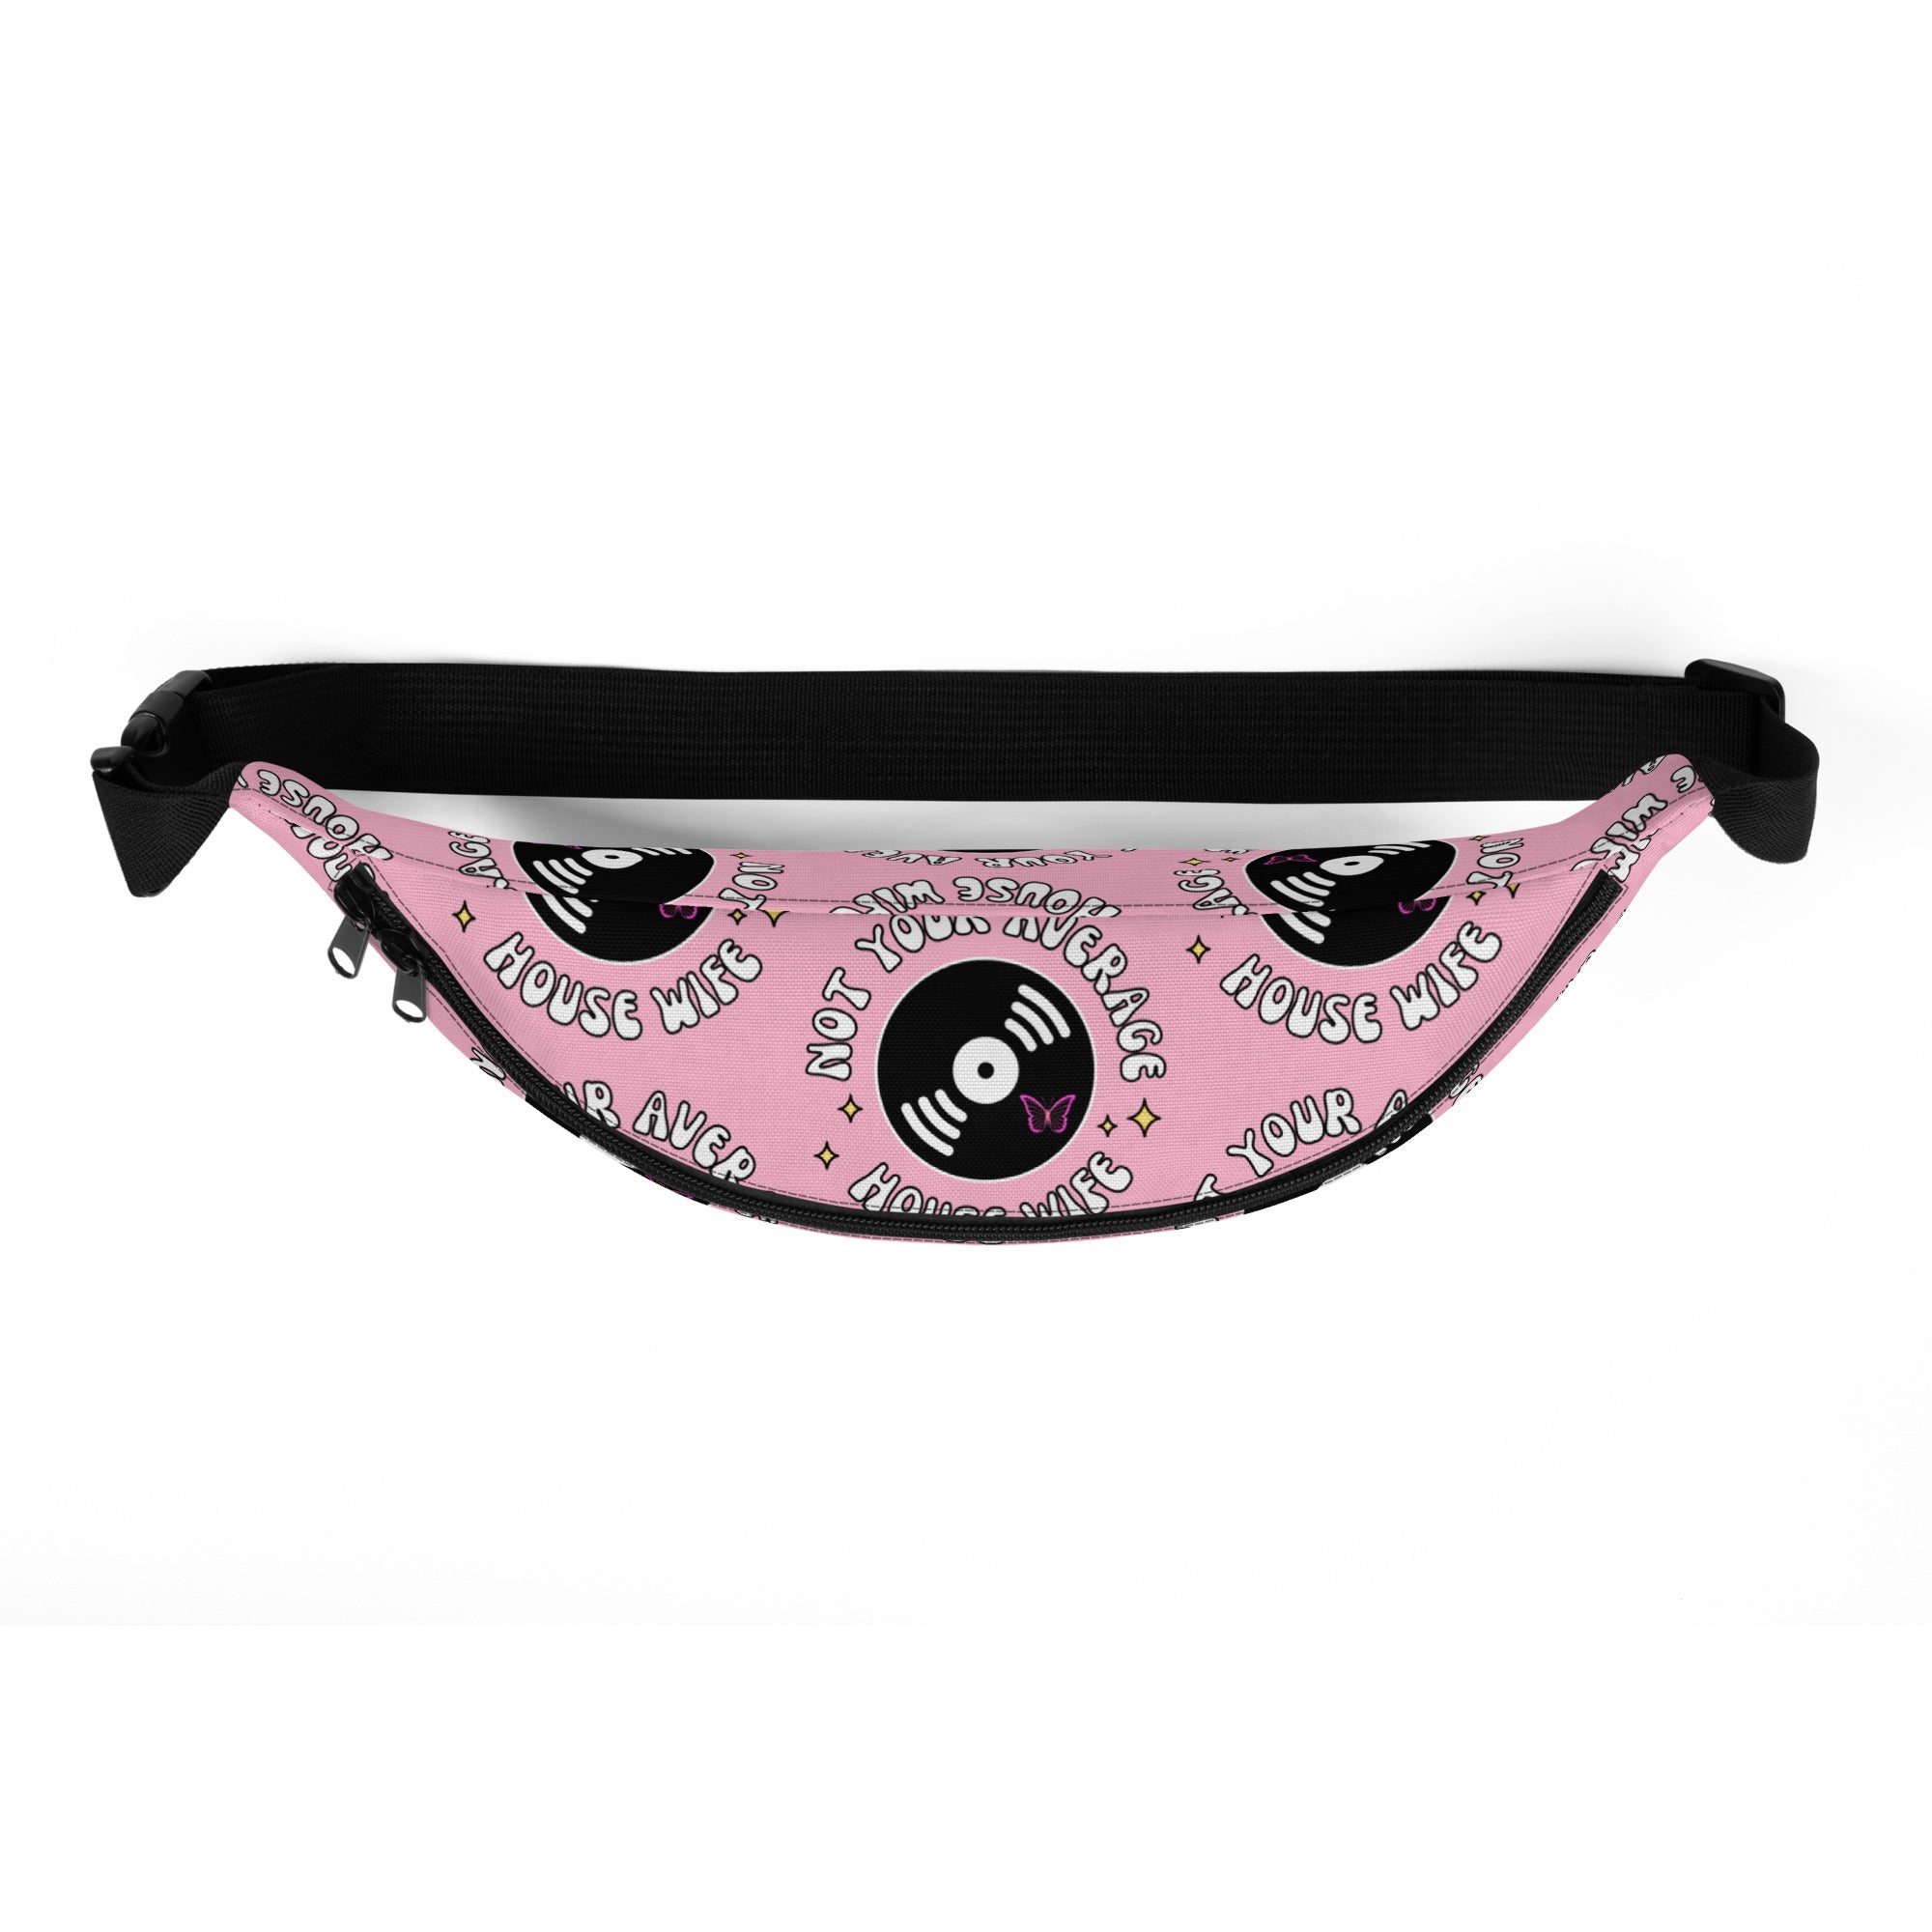 Not Your Average House Wife Fanny Pack